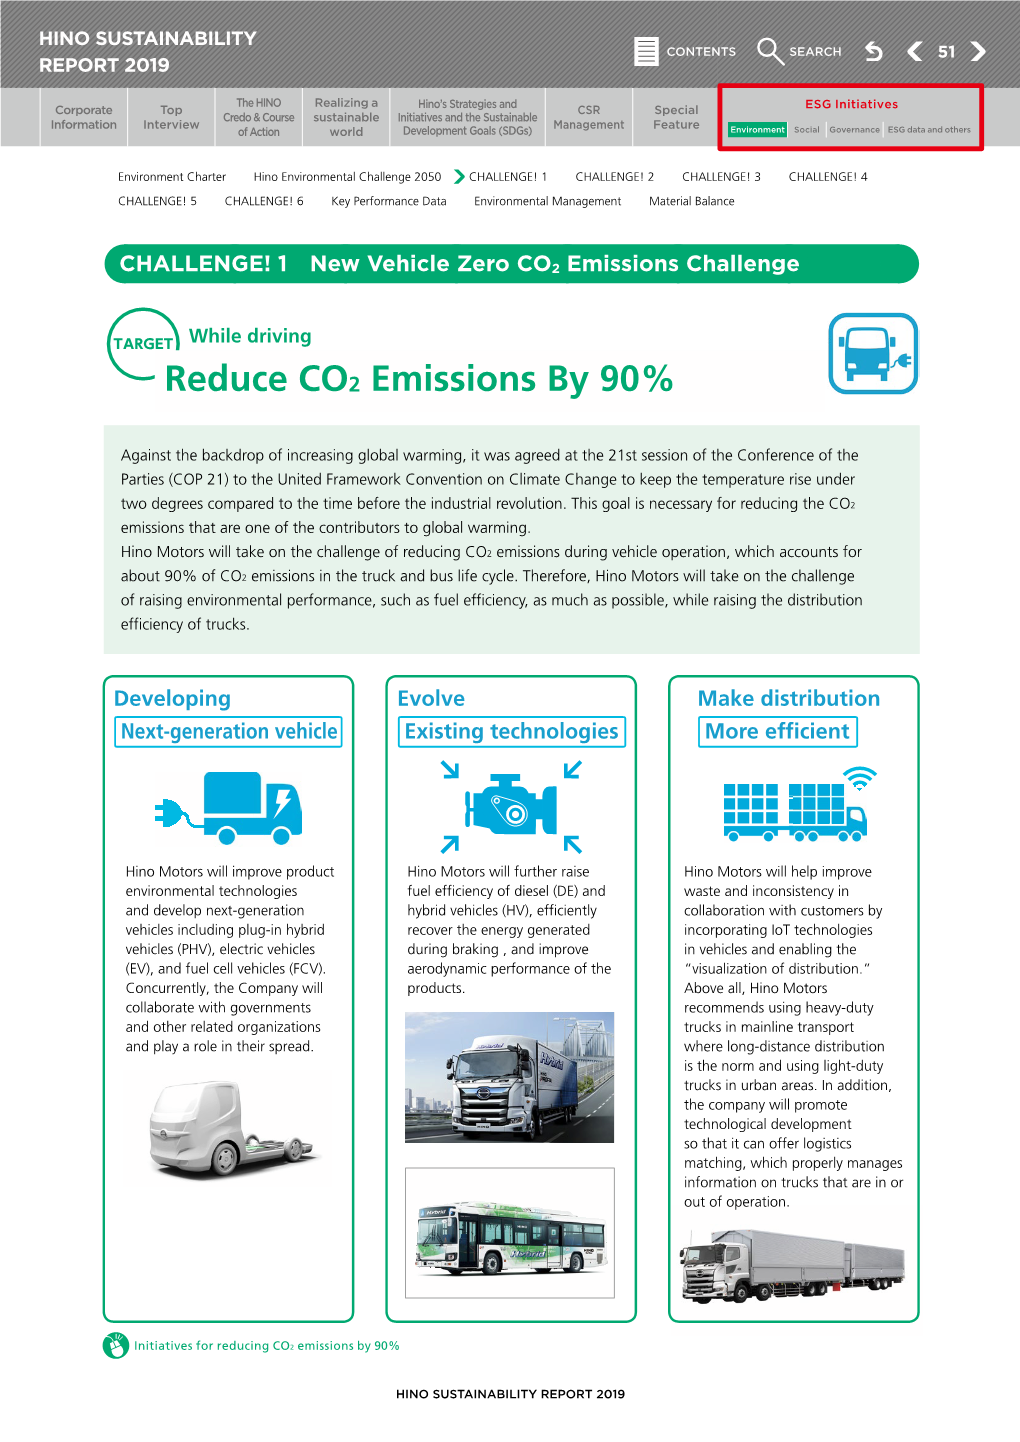 Reduce CO2 Emissions by 90%